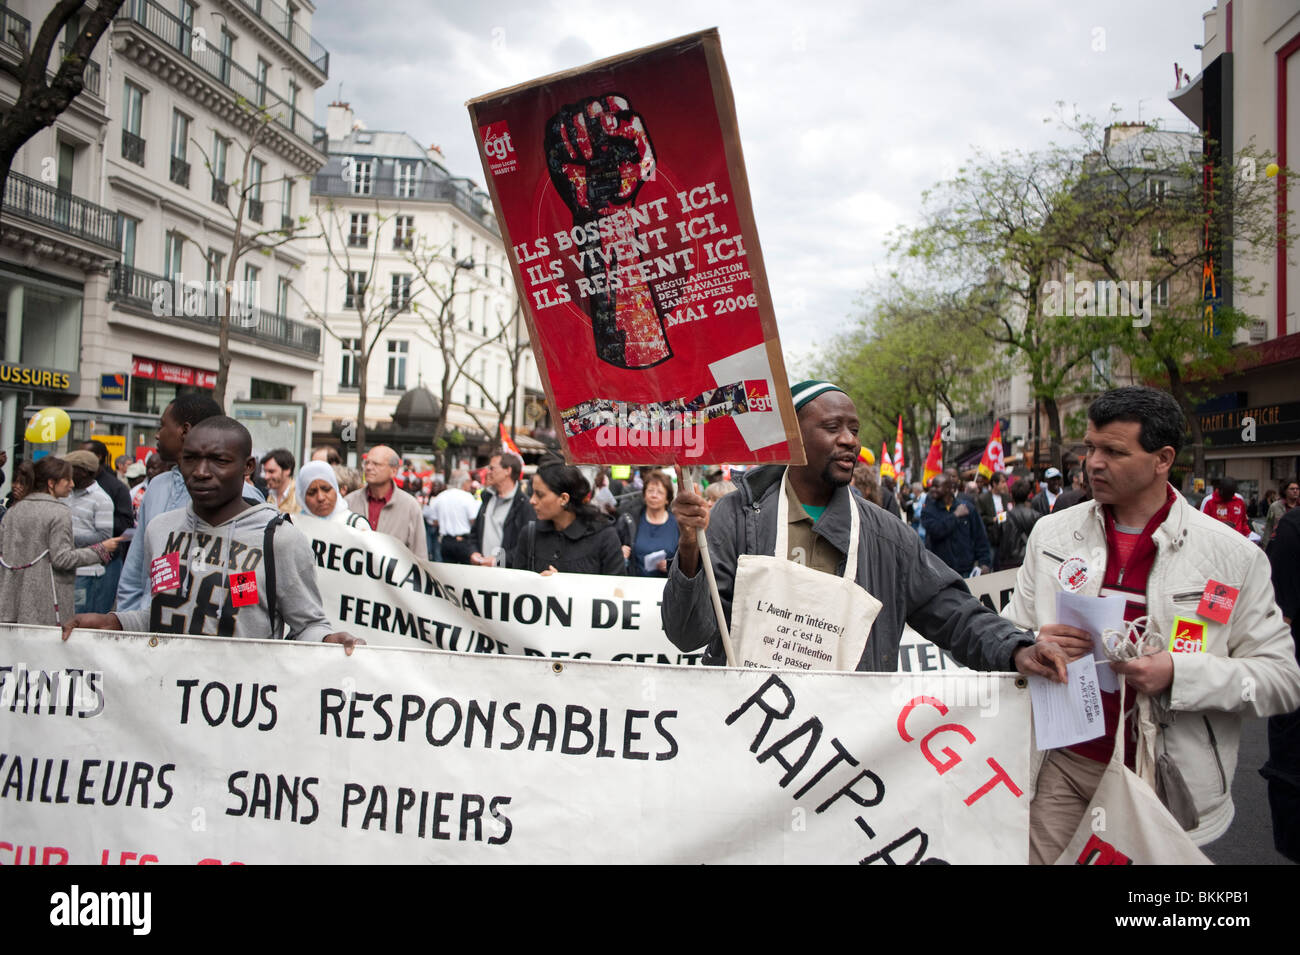 Groups of french crowd diverse People, Sans Papiers, Demonstrating in May 1, May Day Demonstration, Paris, France, Holding Protest signs, CGT, undocumented people, illegal migrants, immigration protests Stock Photo